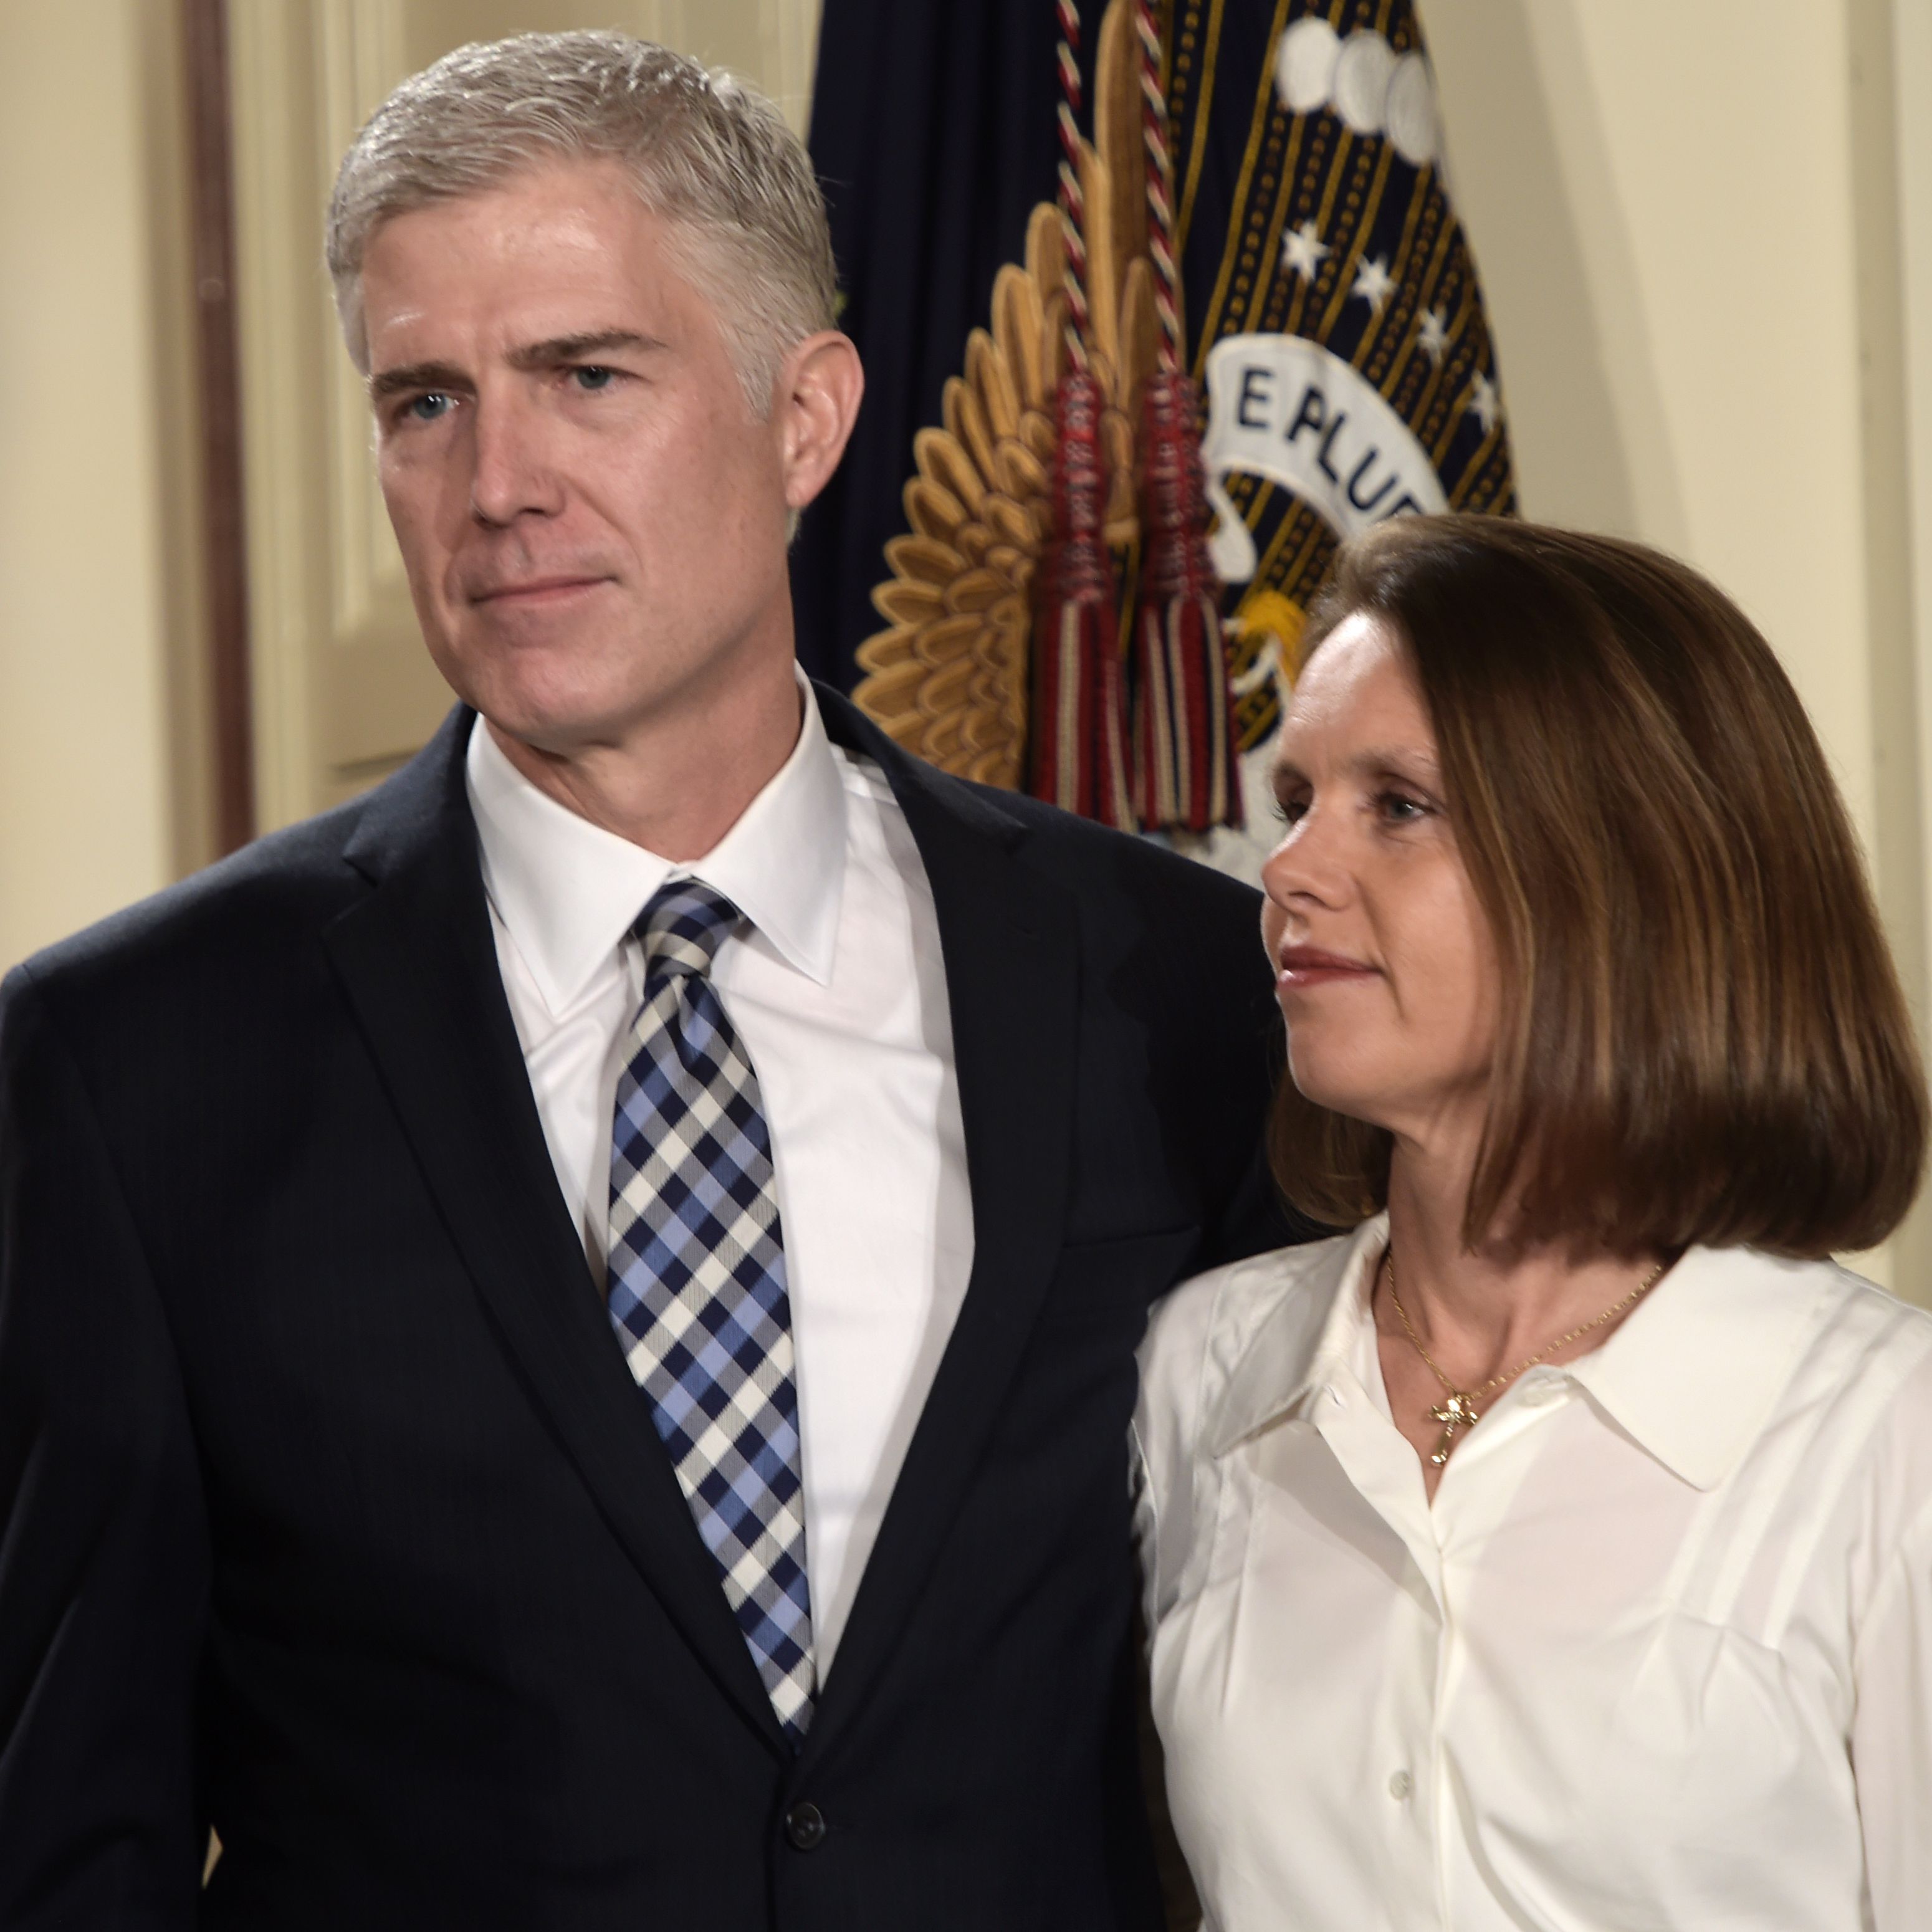 Neil Gorsuch Is the Latest Justice to Show Off Some Fancy Financial Footwork